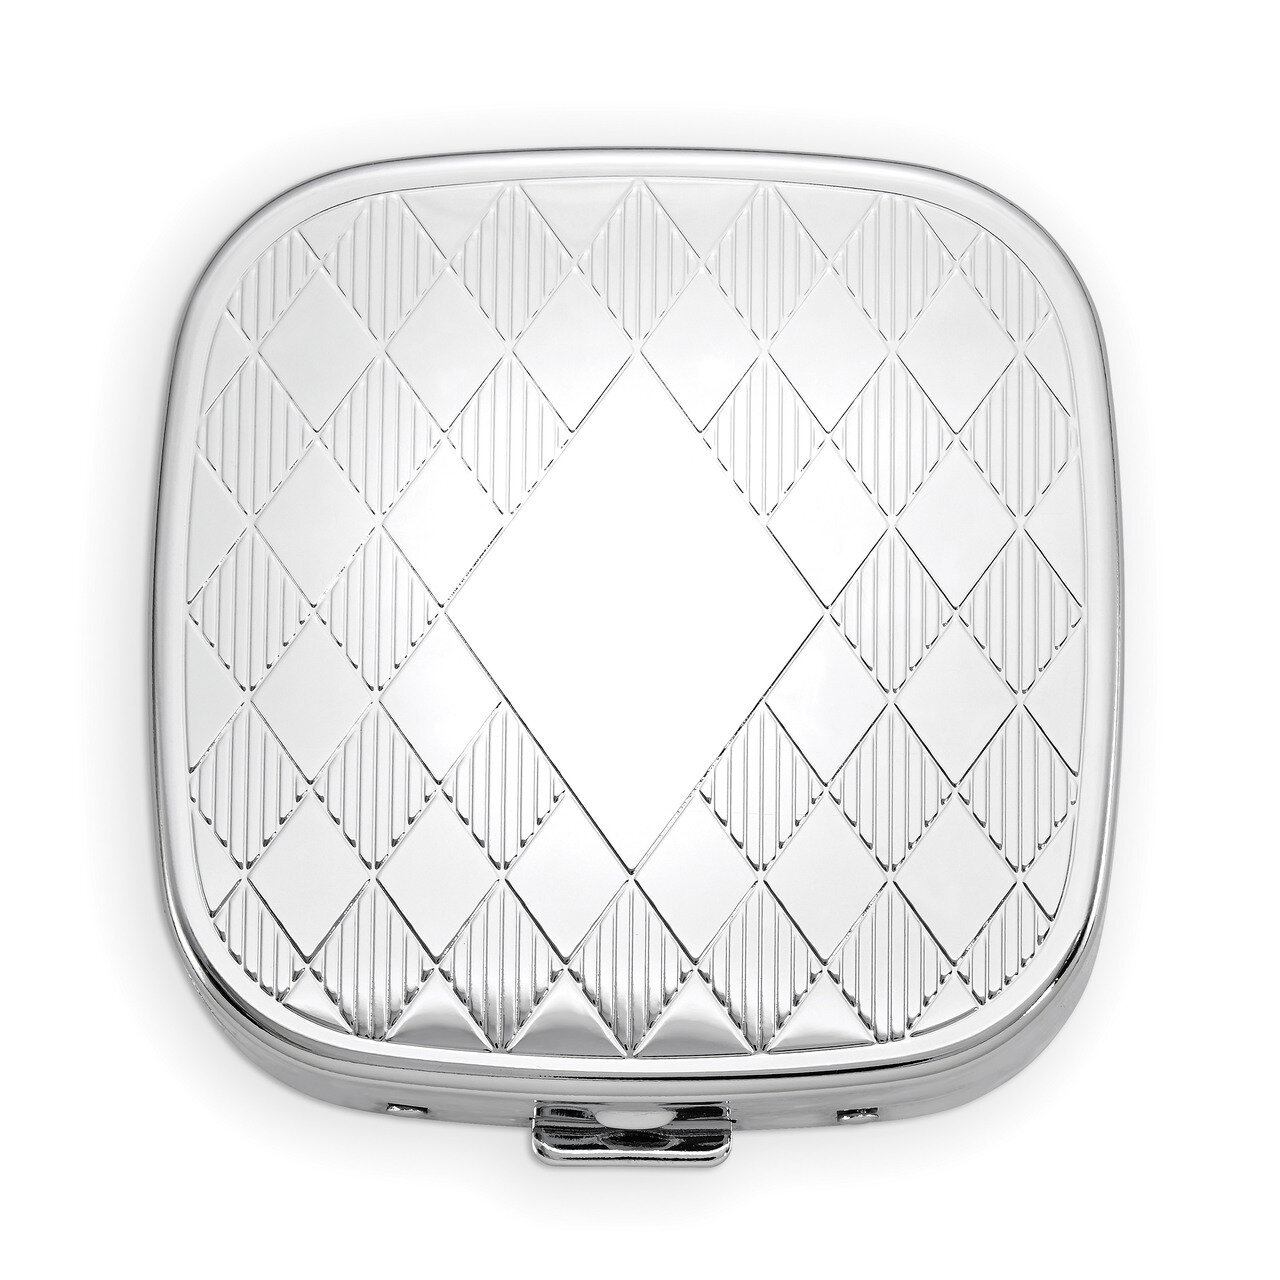 Square 3-Section Diamond Shapes Pillbox with Mirror Silver-tone GM16818